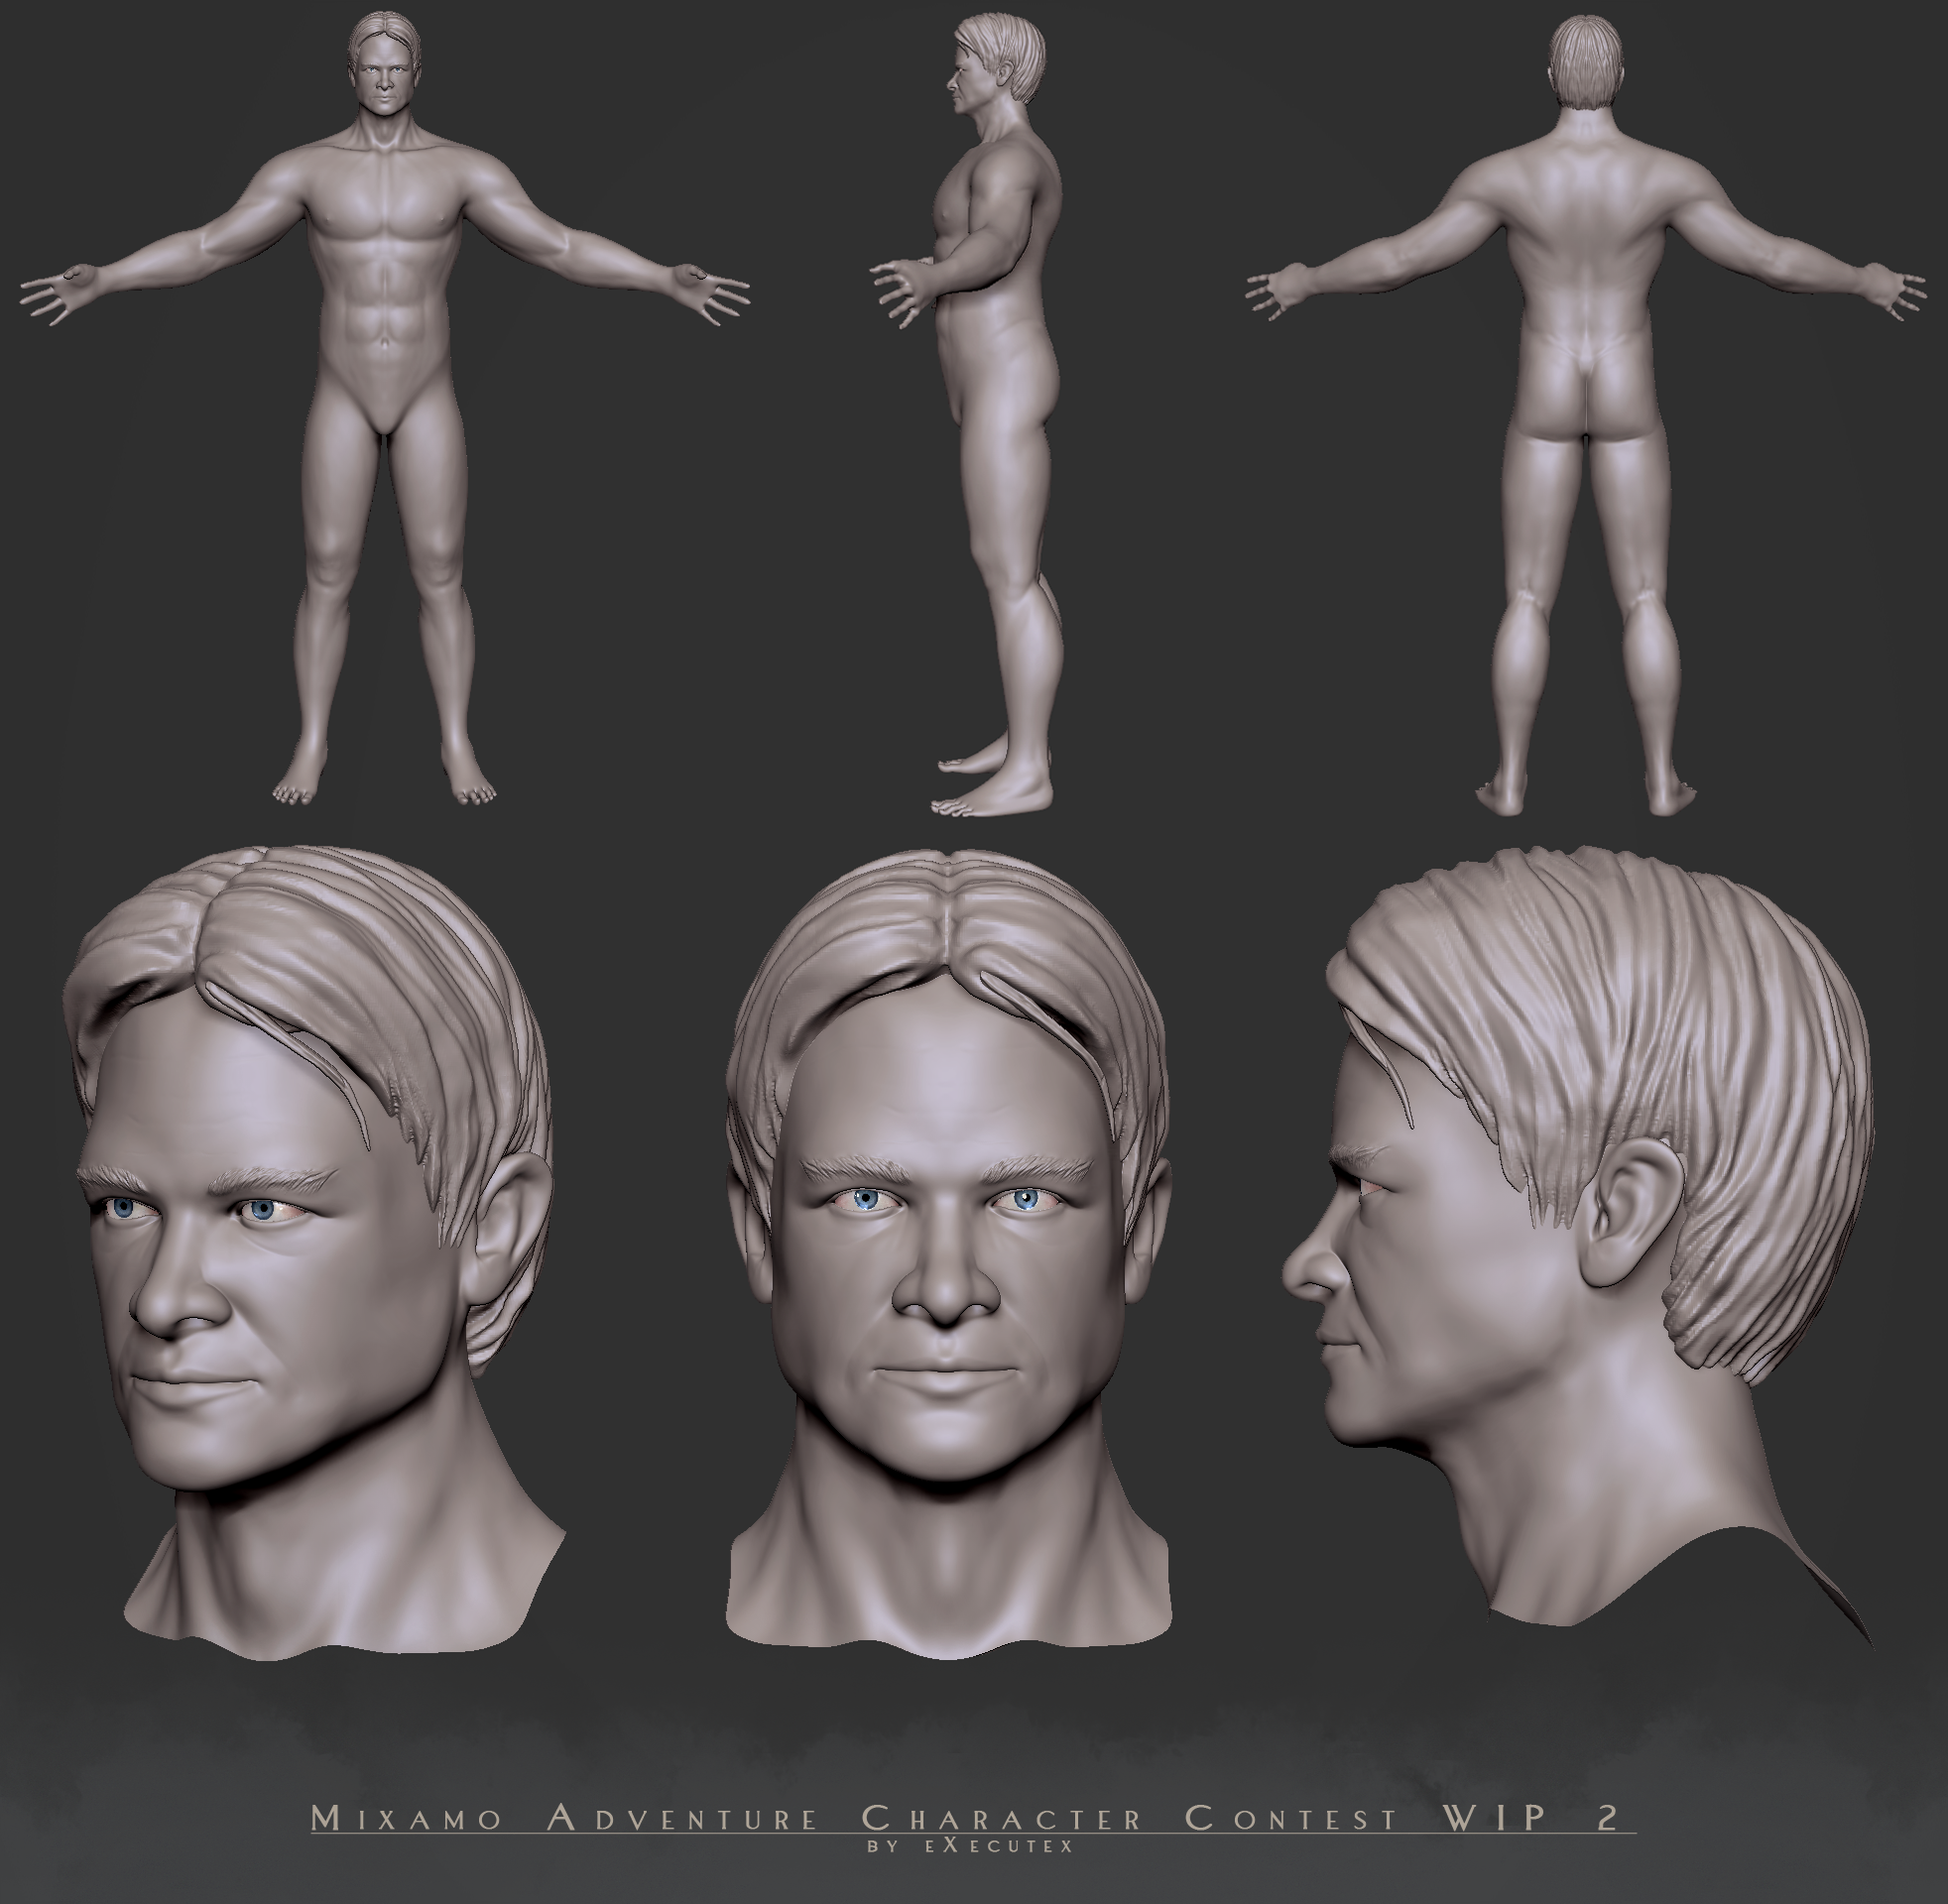 mixamo_adventure_character_by_executex_wip_2_by_executex-d696r5e.png